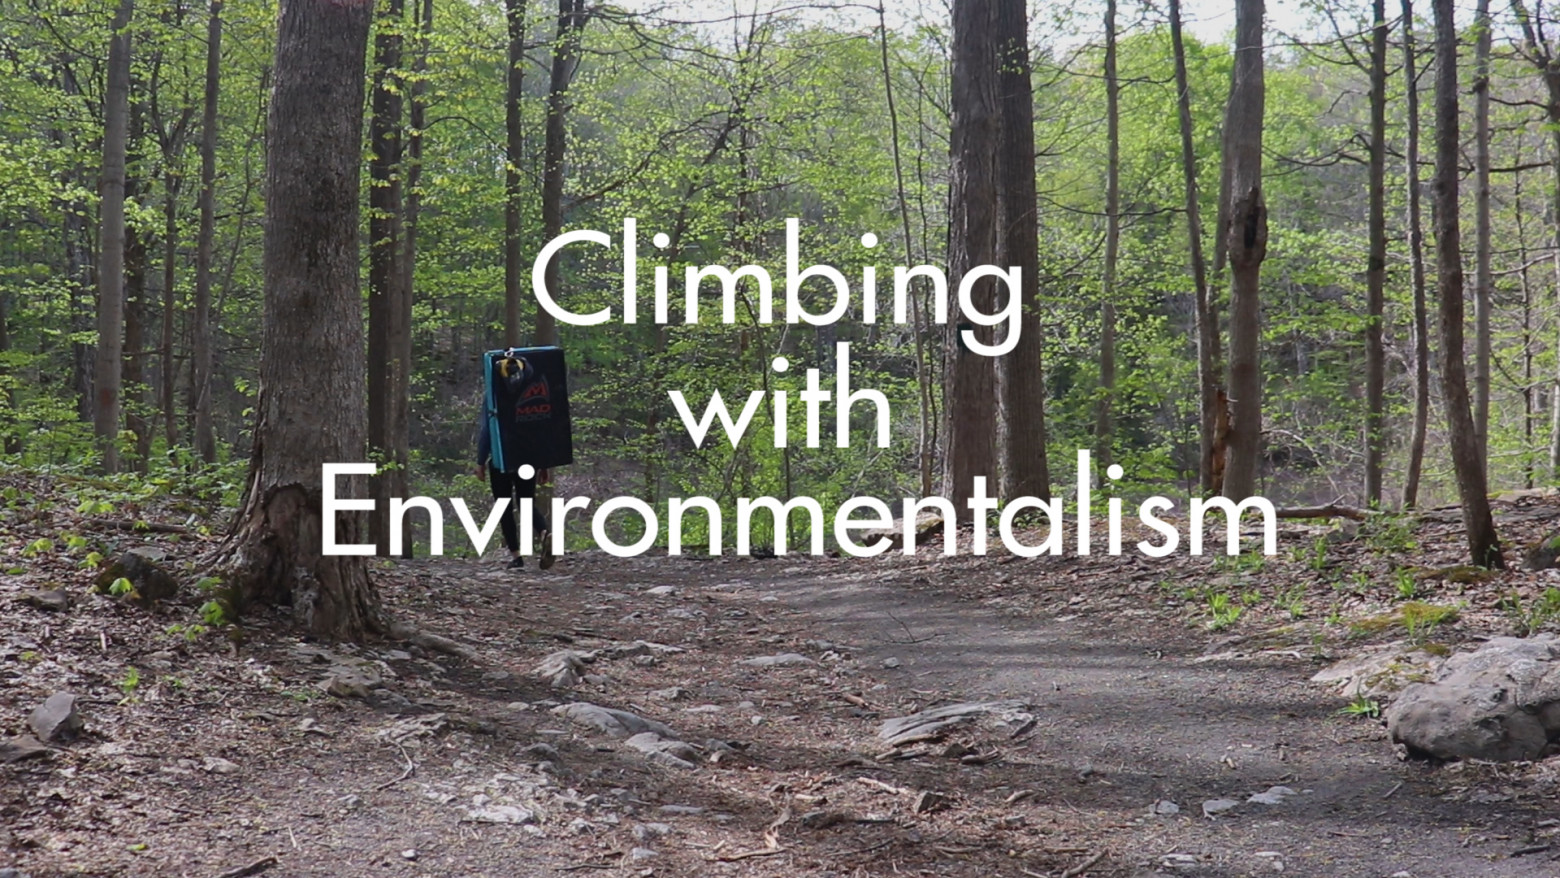 Climbing with environmentalism